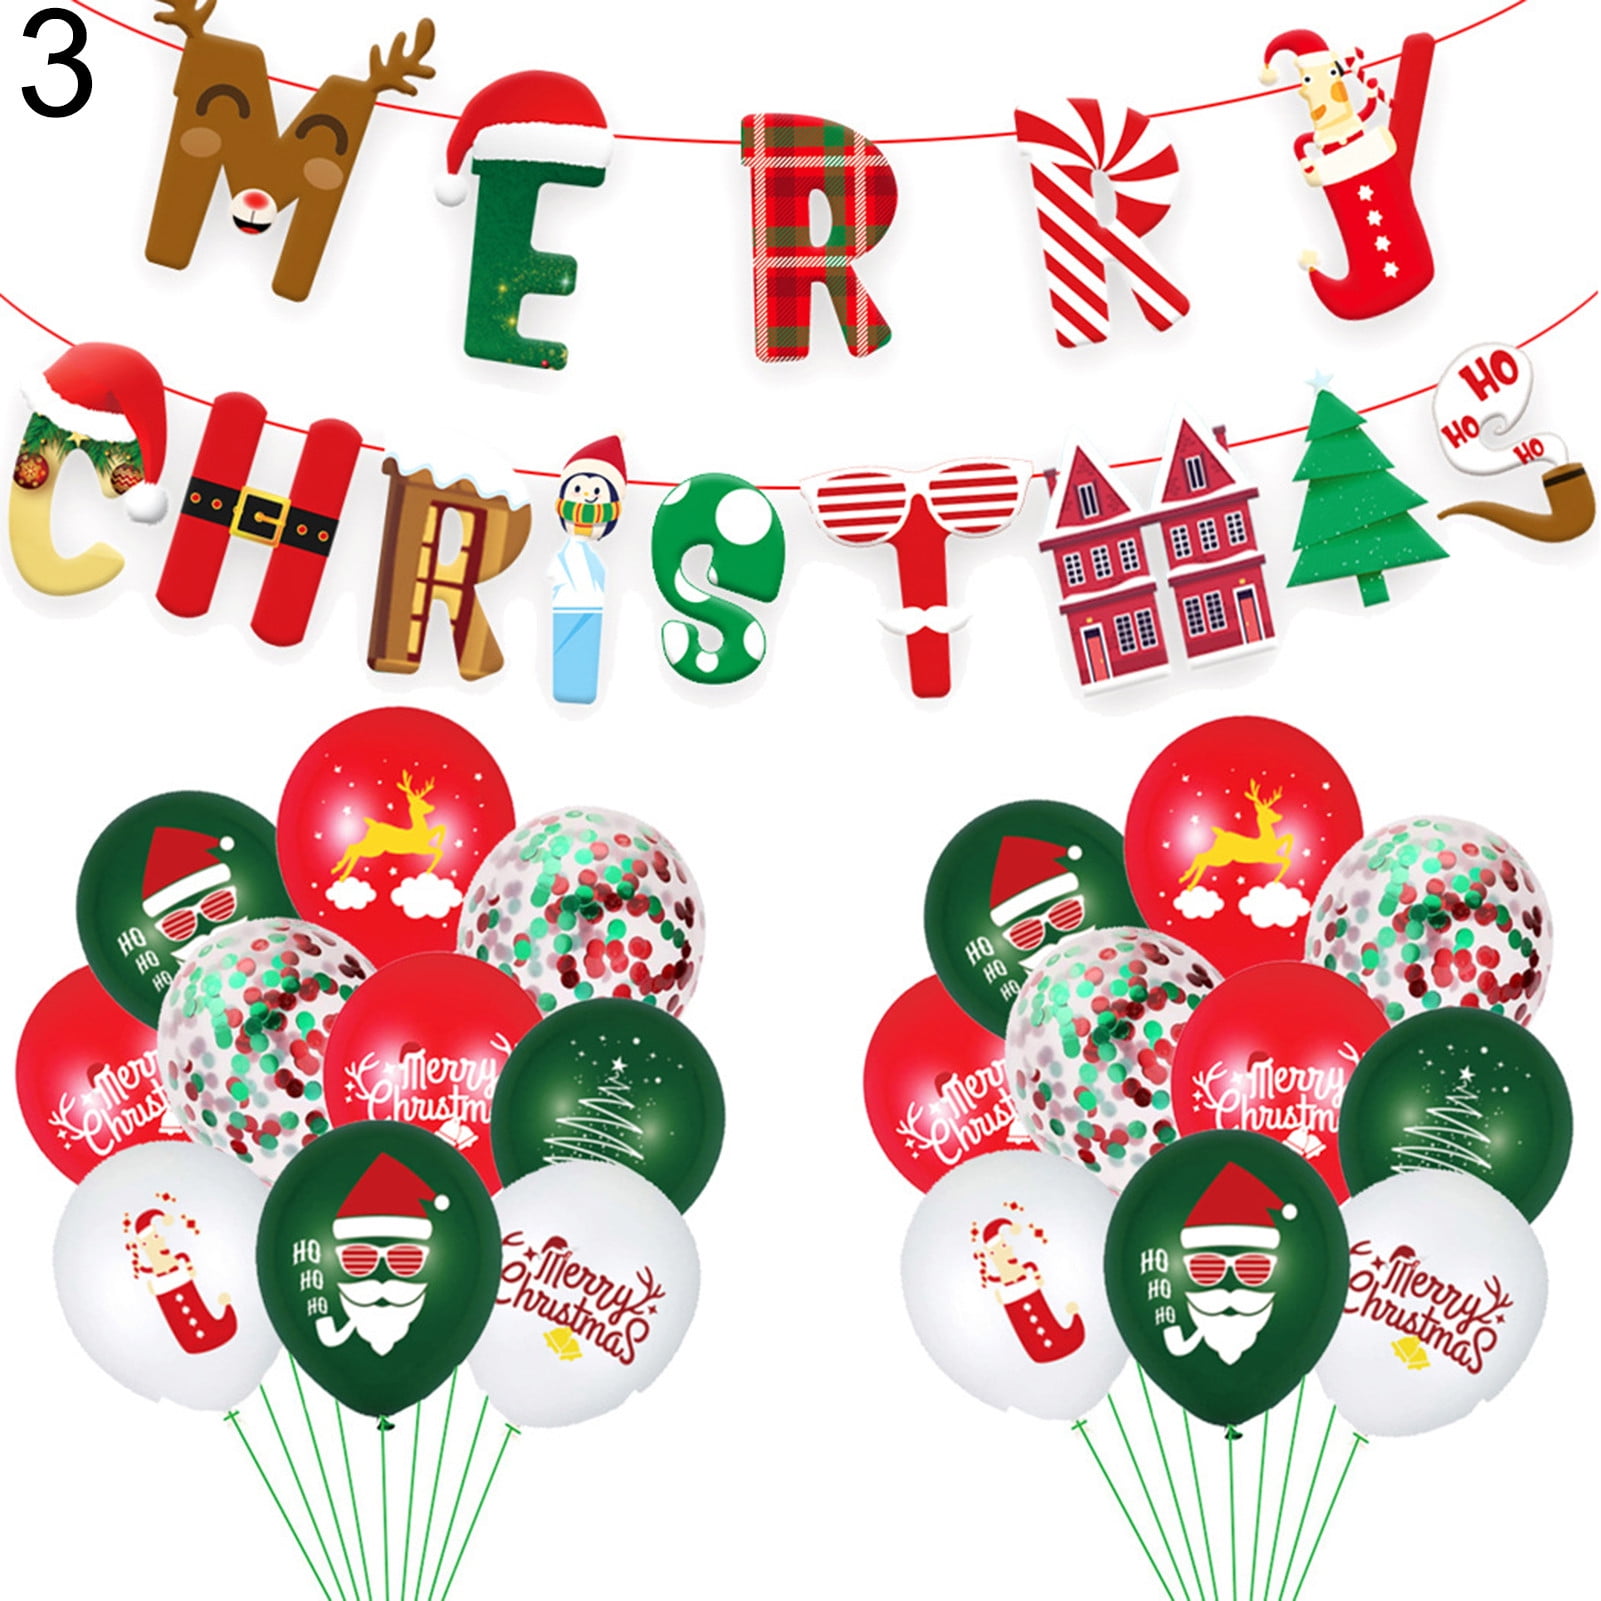 16 inch Letters Merry Christmas Foil Balloons Party Home Wall Backdrop Decor 